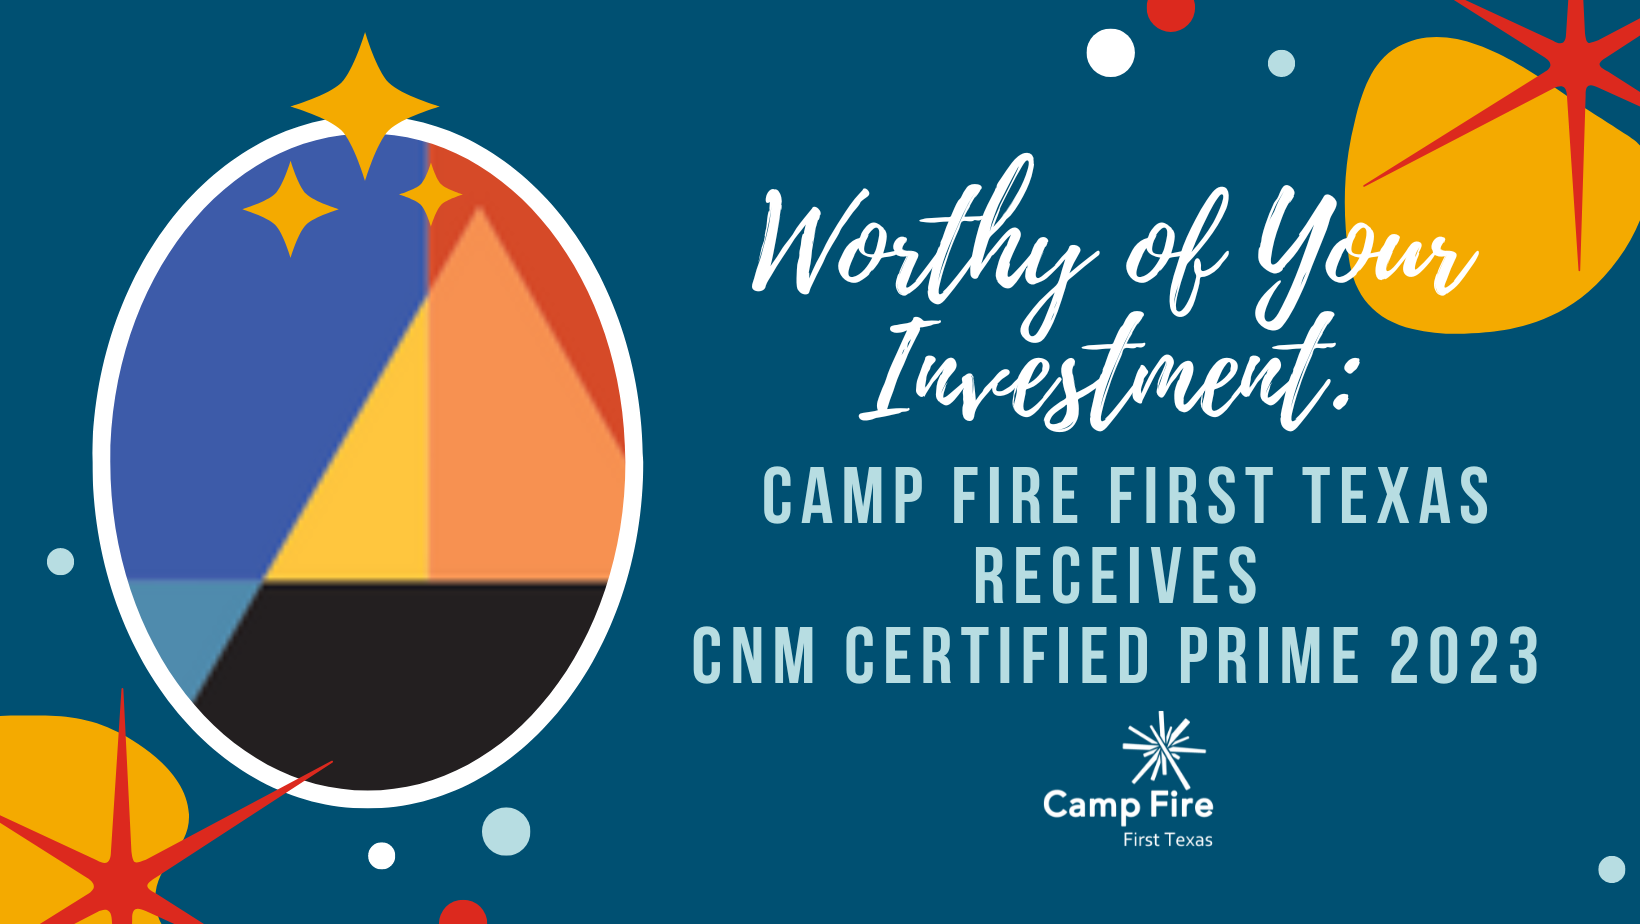 Worthy of Your Investment: Camp Fire First Texas Receives CNM Certified Prime 2023